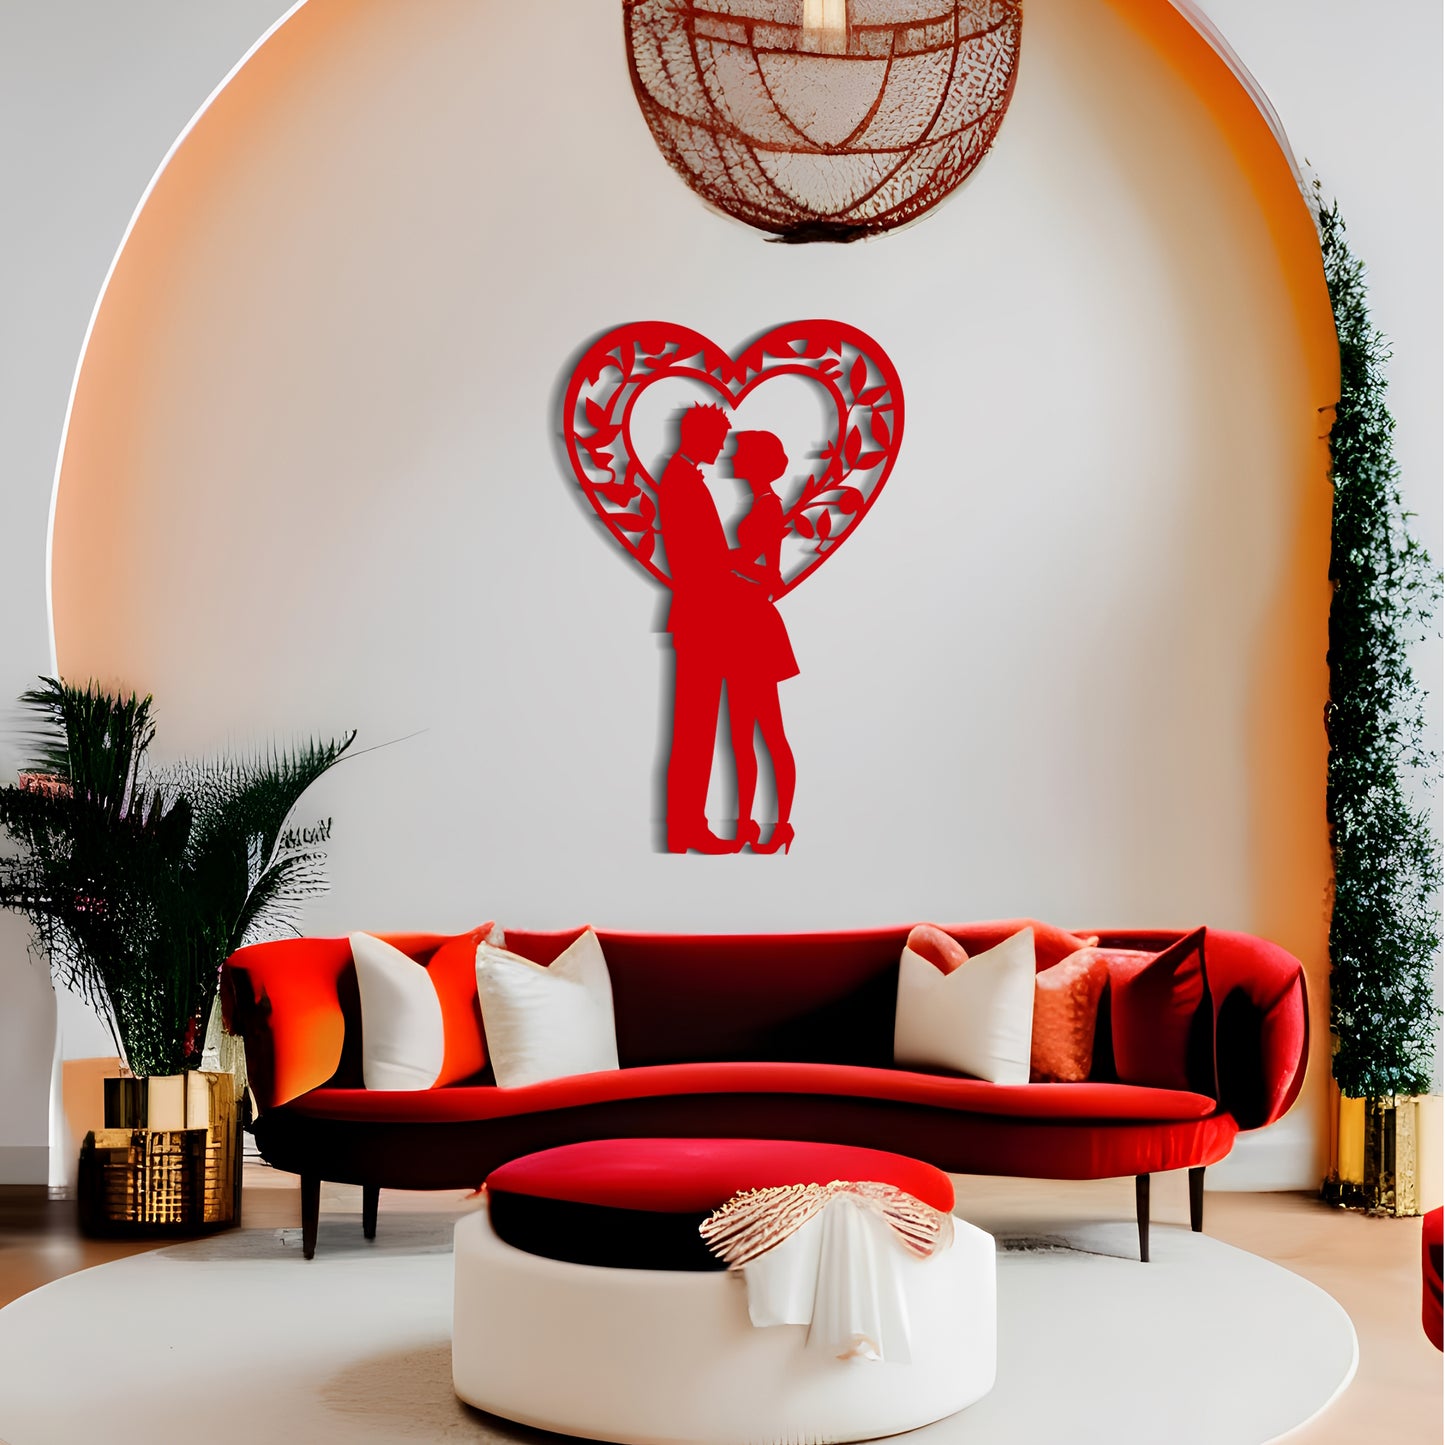 Romantic Silhouette Wall Decor with Heart